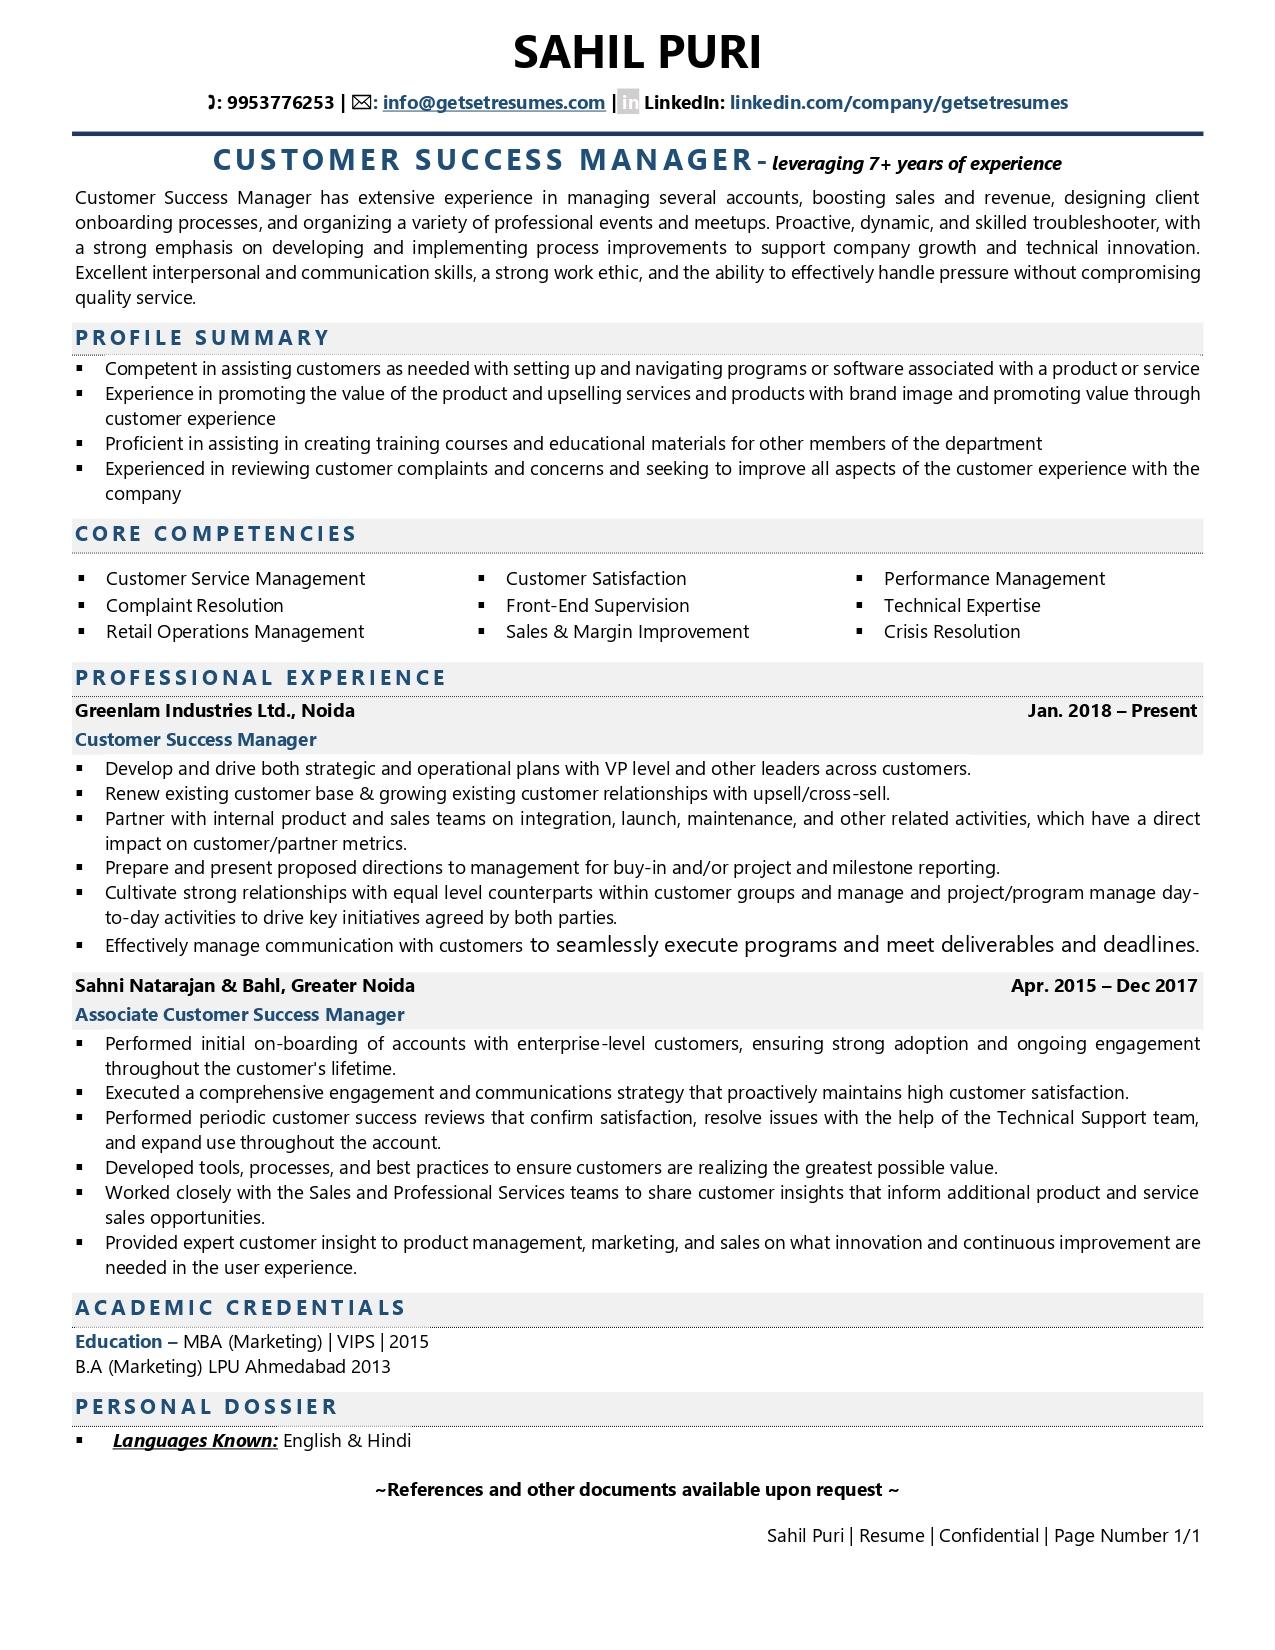 customer-success-manager-resume-examples-template-with-job-winning-tips